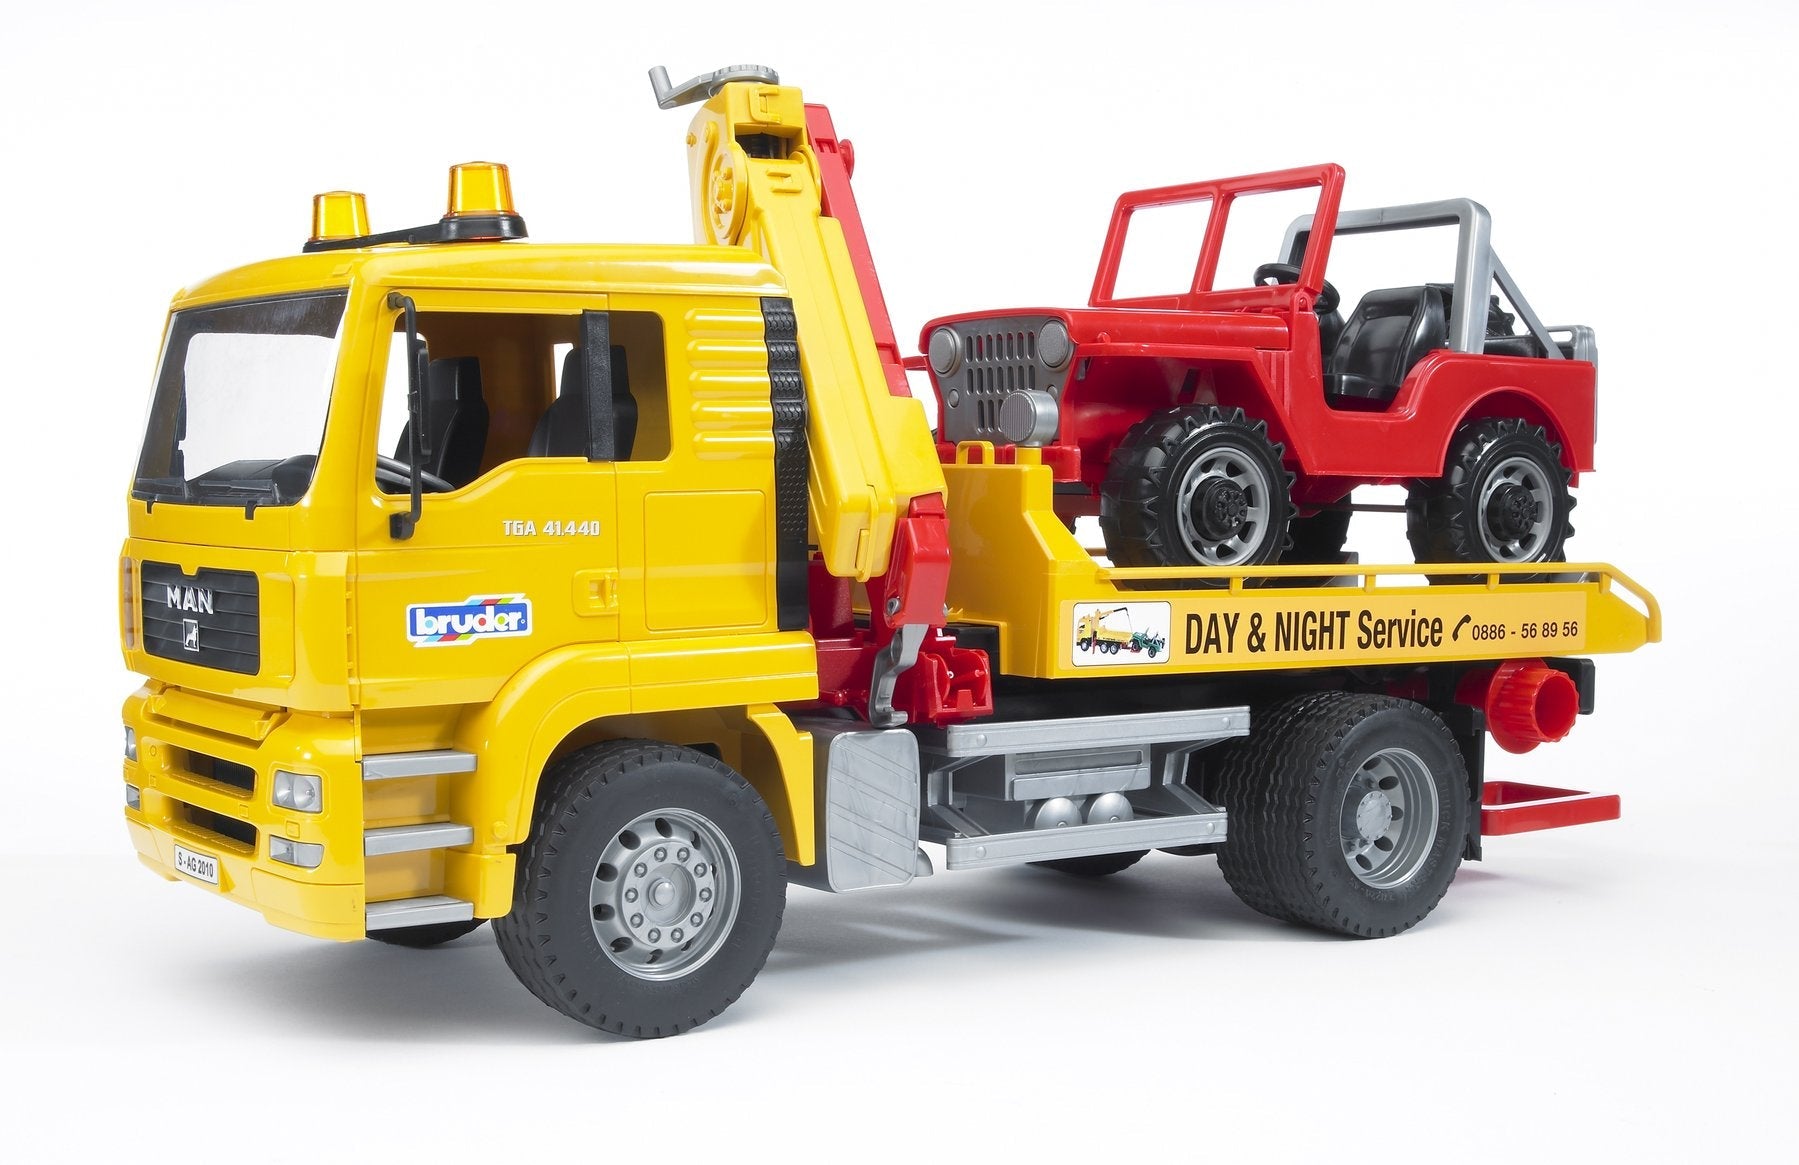 Bruder 2750 MAN TGA Tow Truck with Cross Country Vehicle